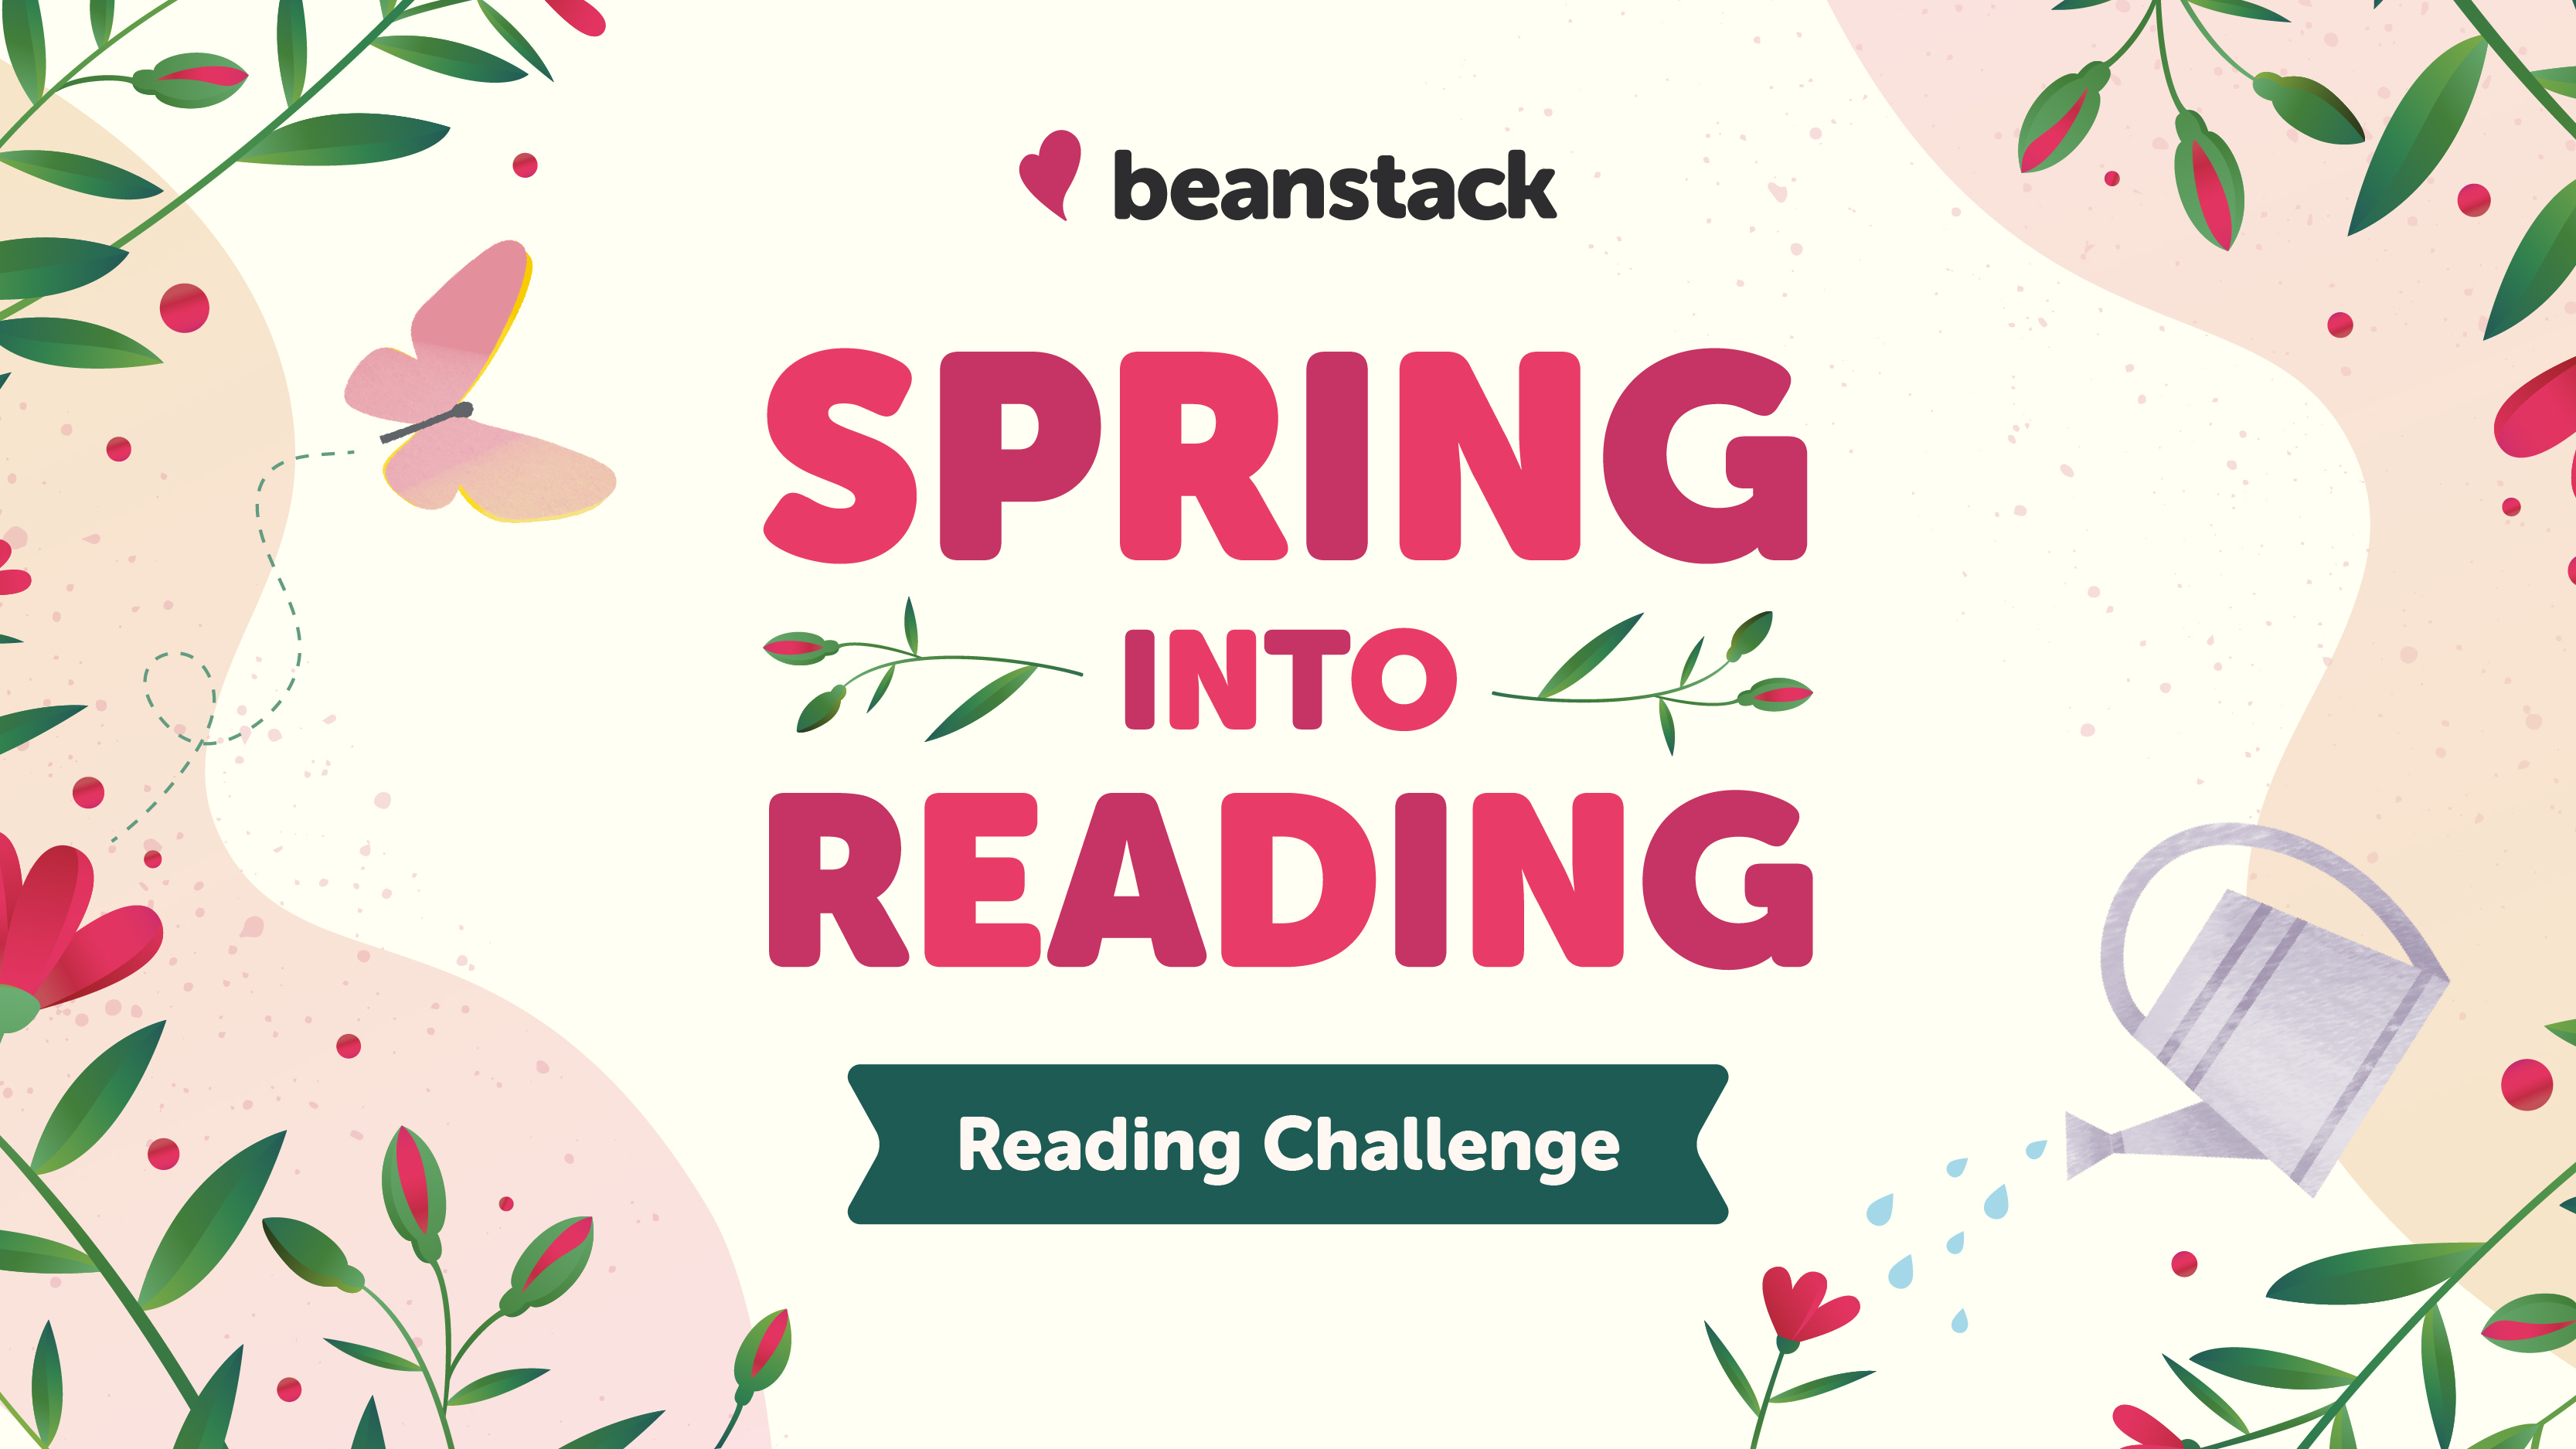 Beanstack Spring into Reading Reading Challenge